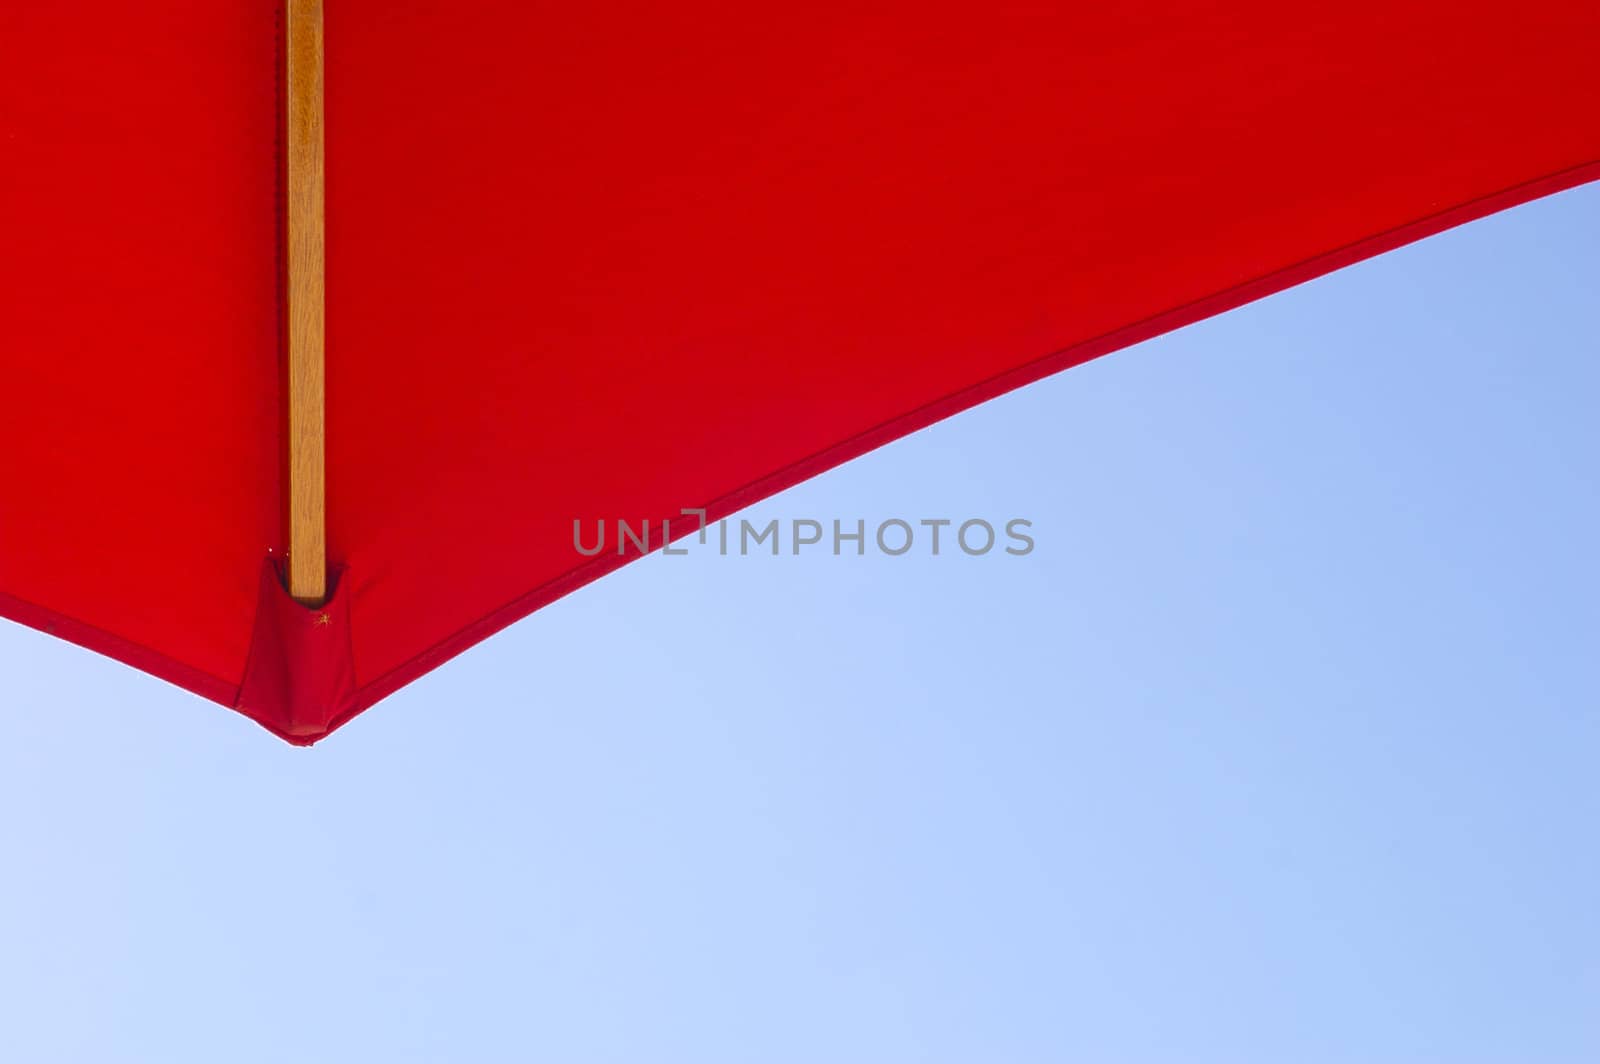 Point of a bright red sun umbrella/ sun-shade/ parasol against a bright blue sky, taken from beneath, as if looking up, with copy space.